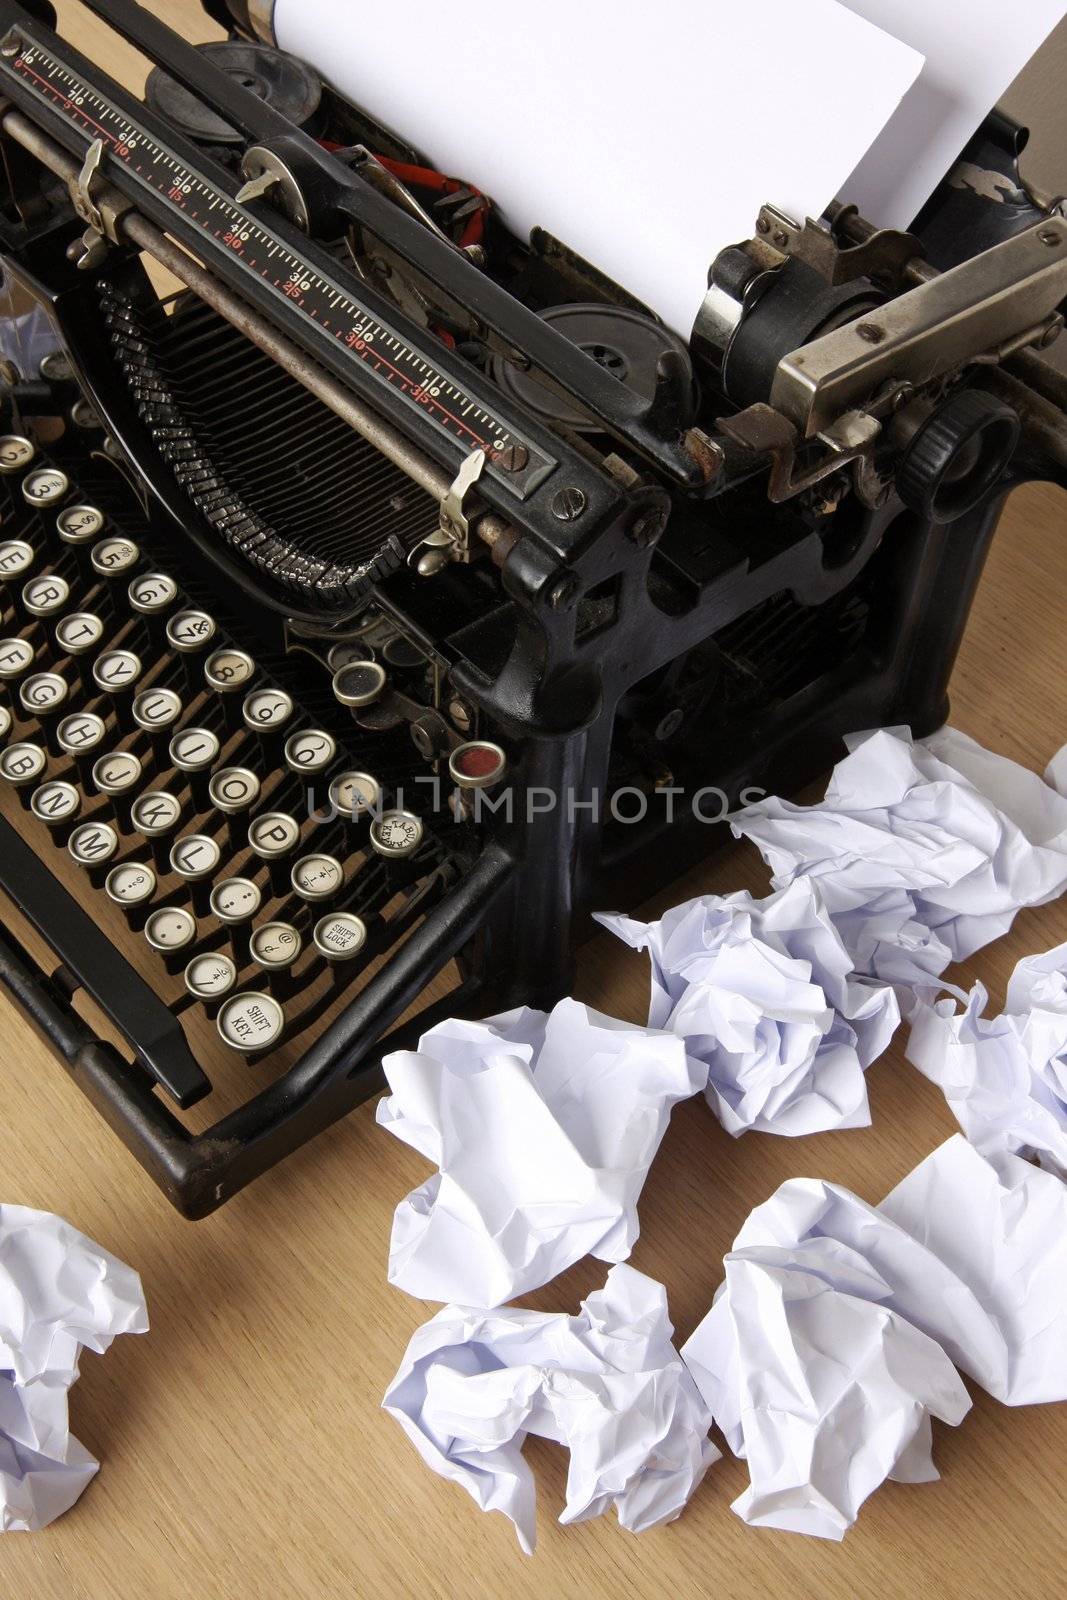 Retro typewriter with paper scattered all around - conceptual image for creative block